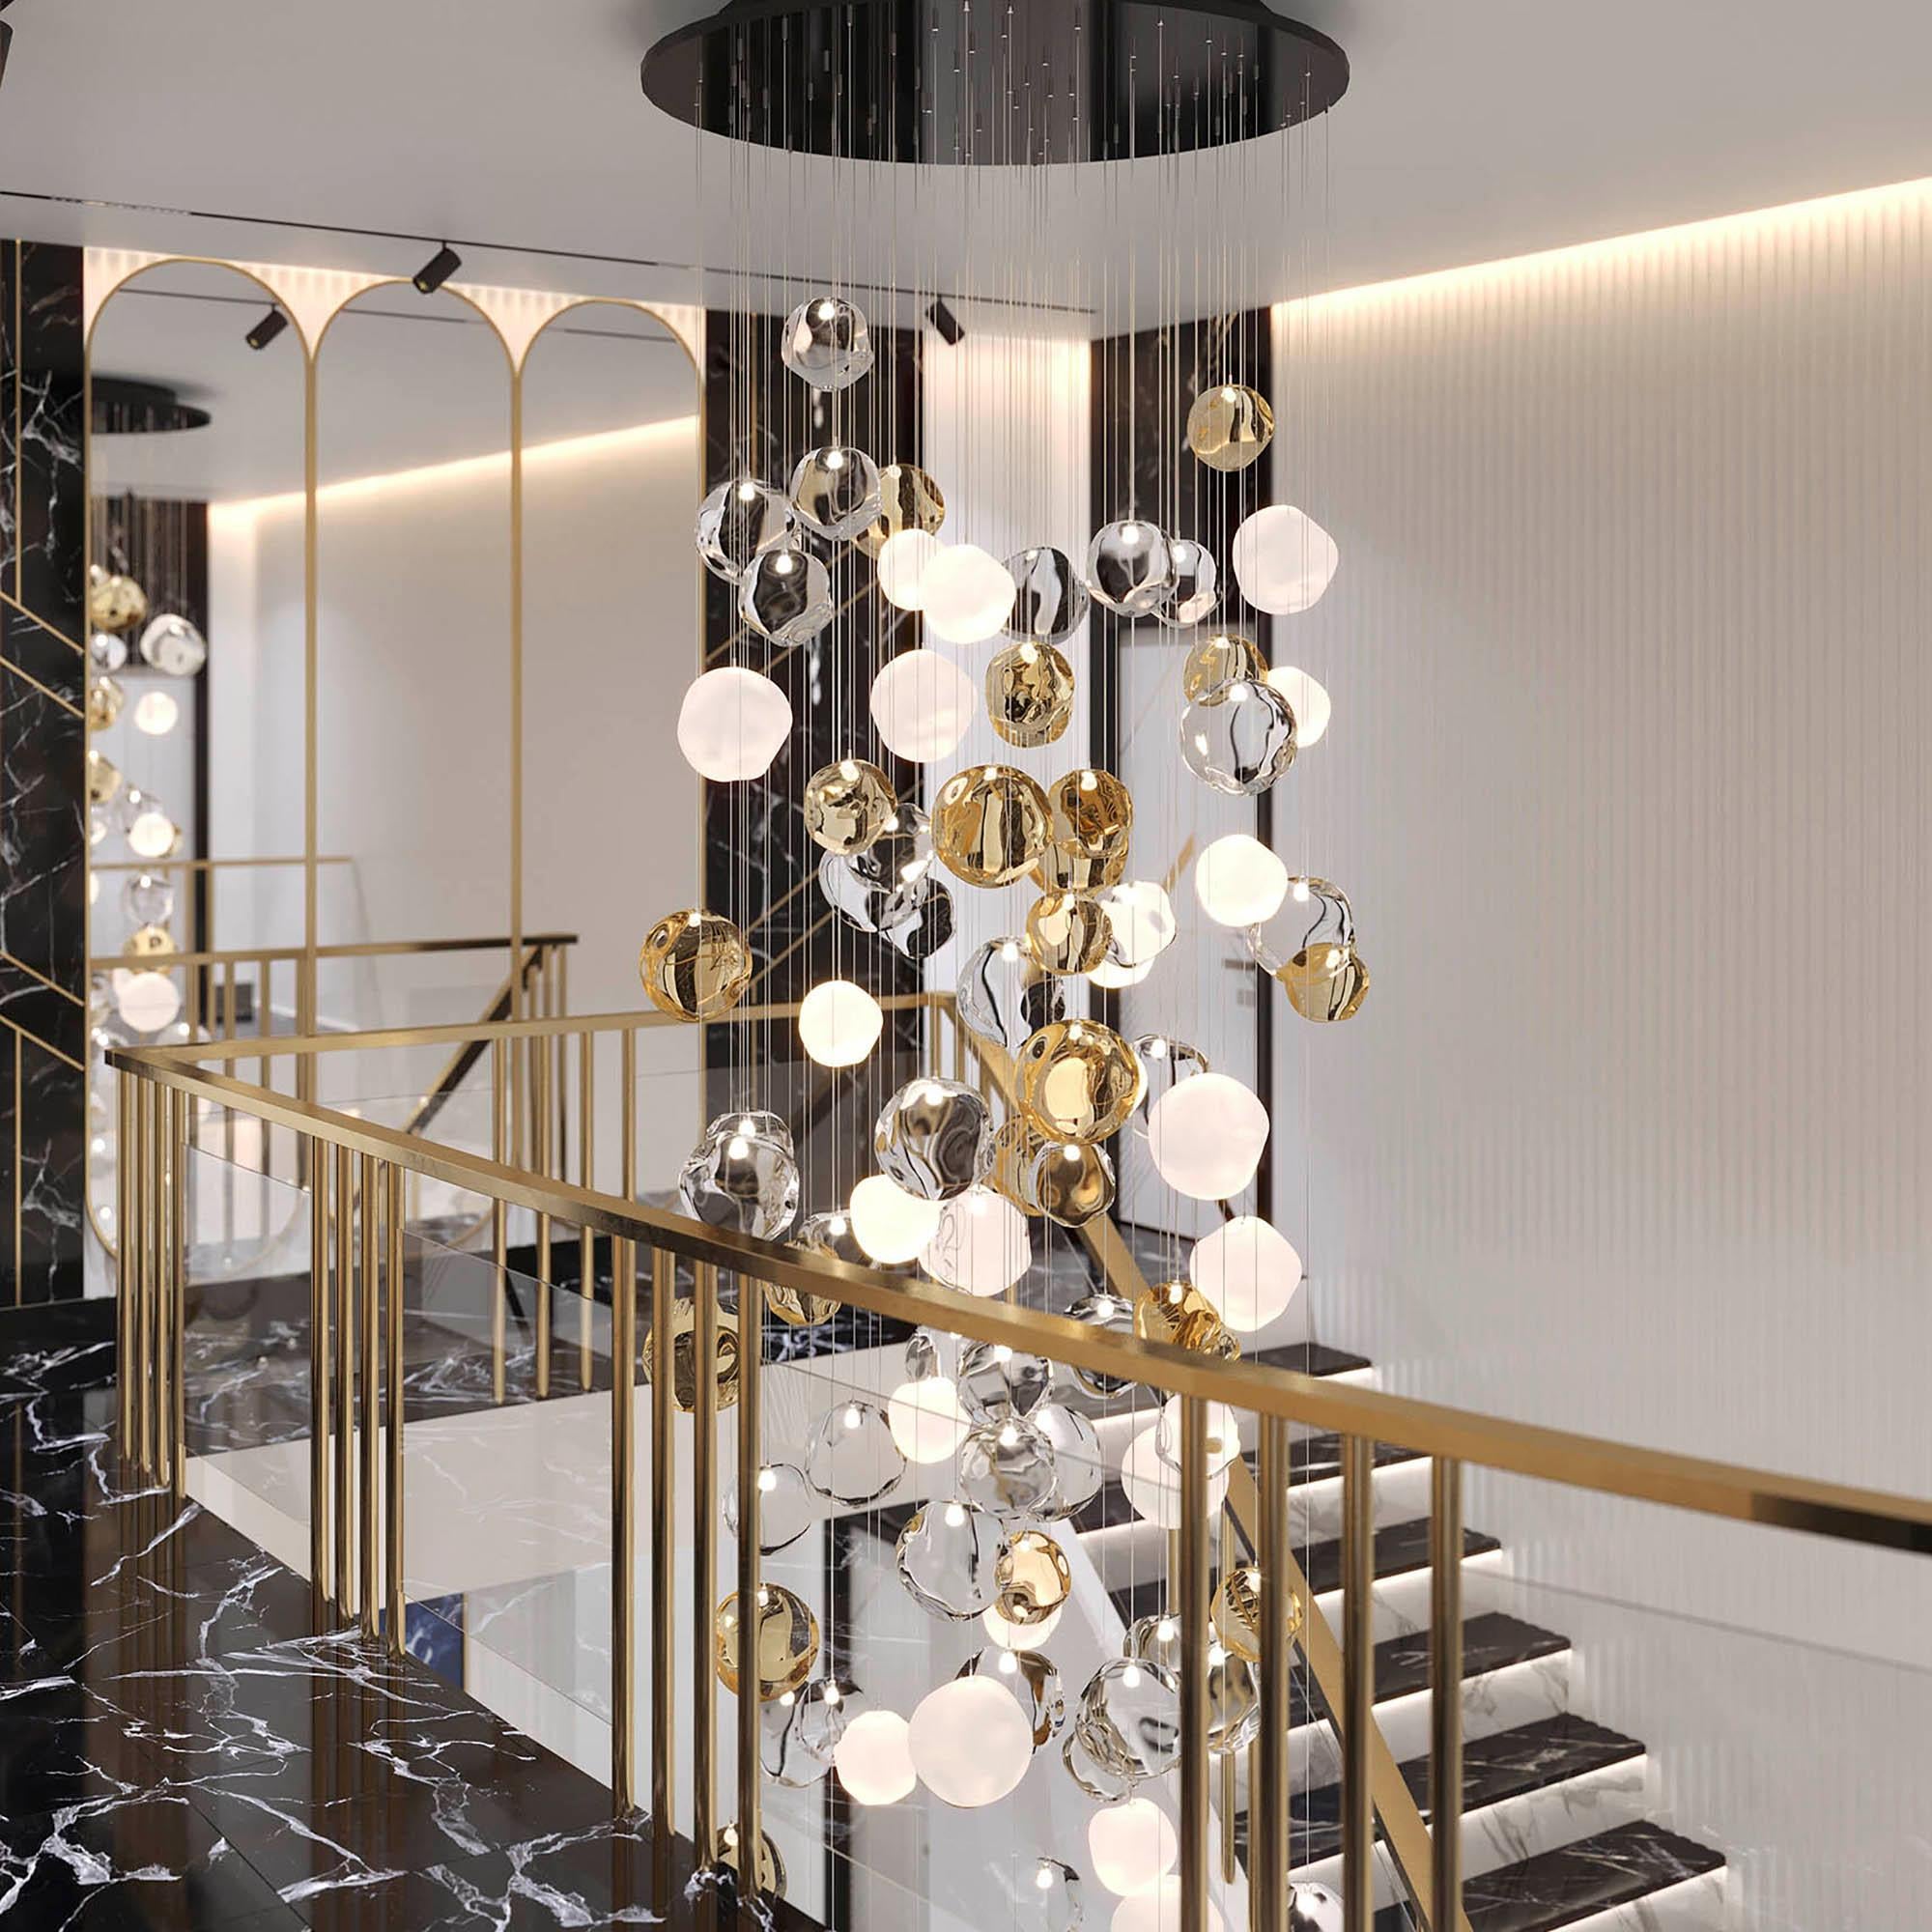 Elegant and unmistakable, suggestive and poetical, soft and delicate are some of the adjectives that can be used to describe the blown glass ball chandelier Desafinado, our ceiling light with hand-blown glass spheres.

This item consists in a new